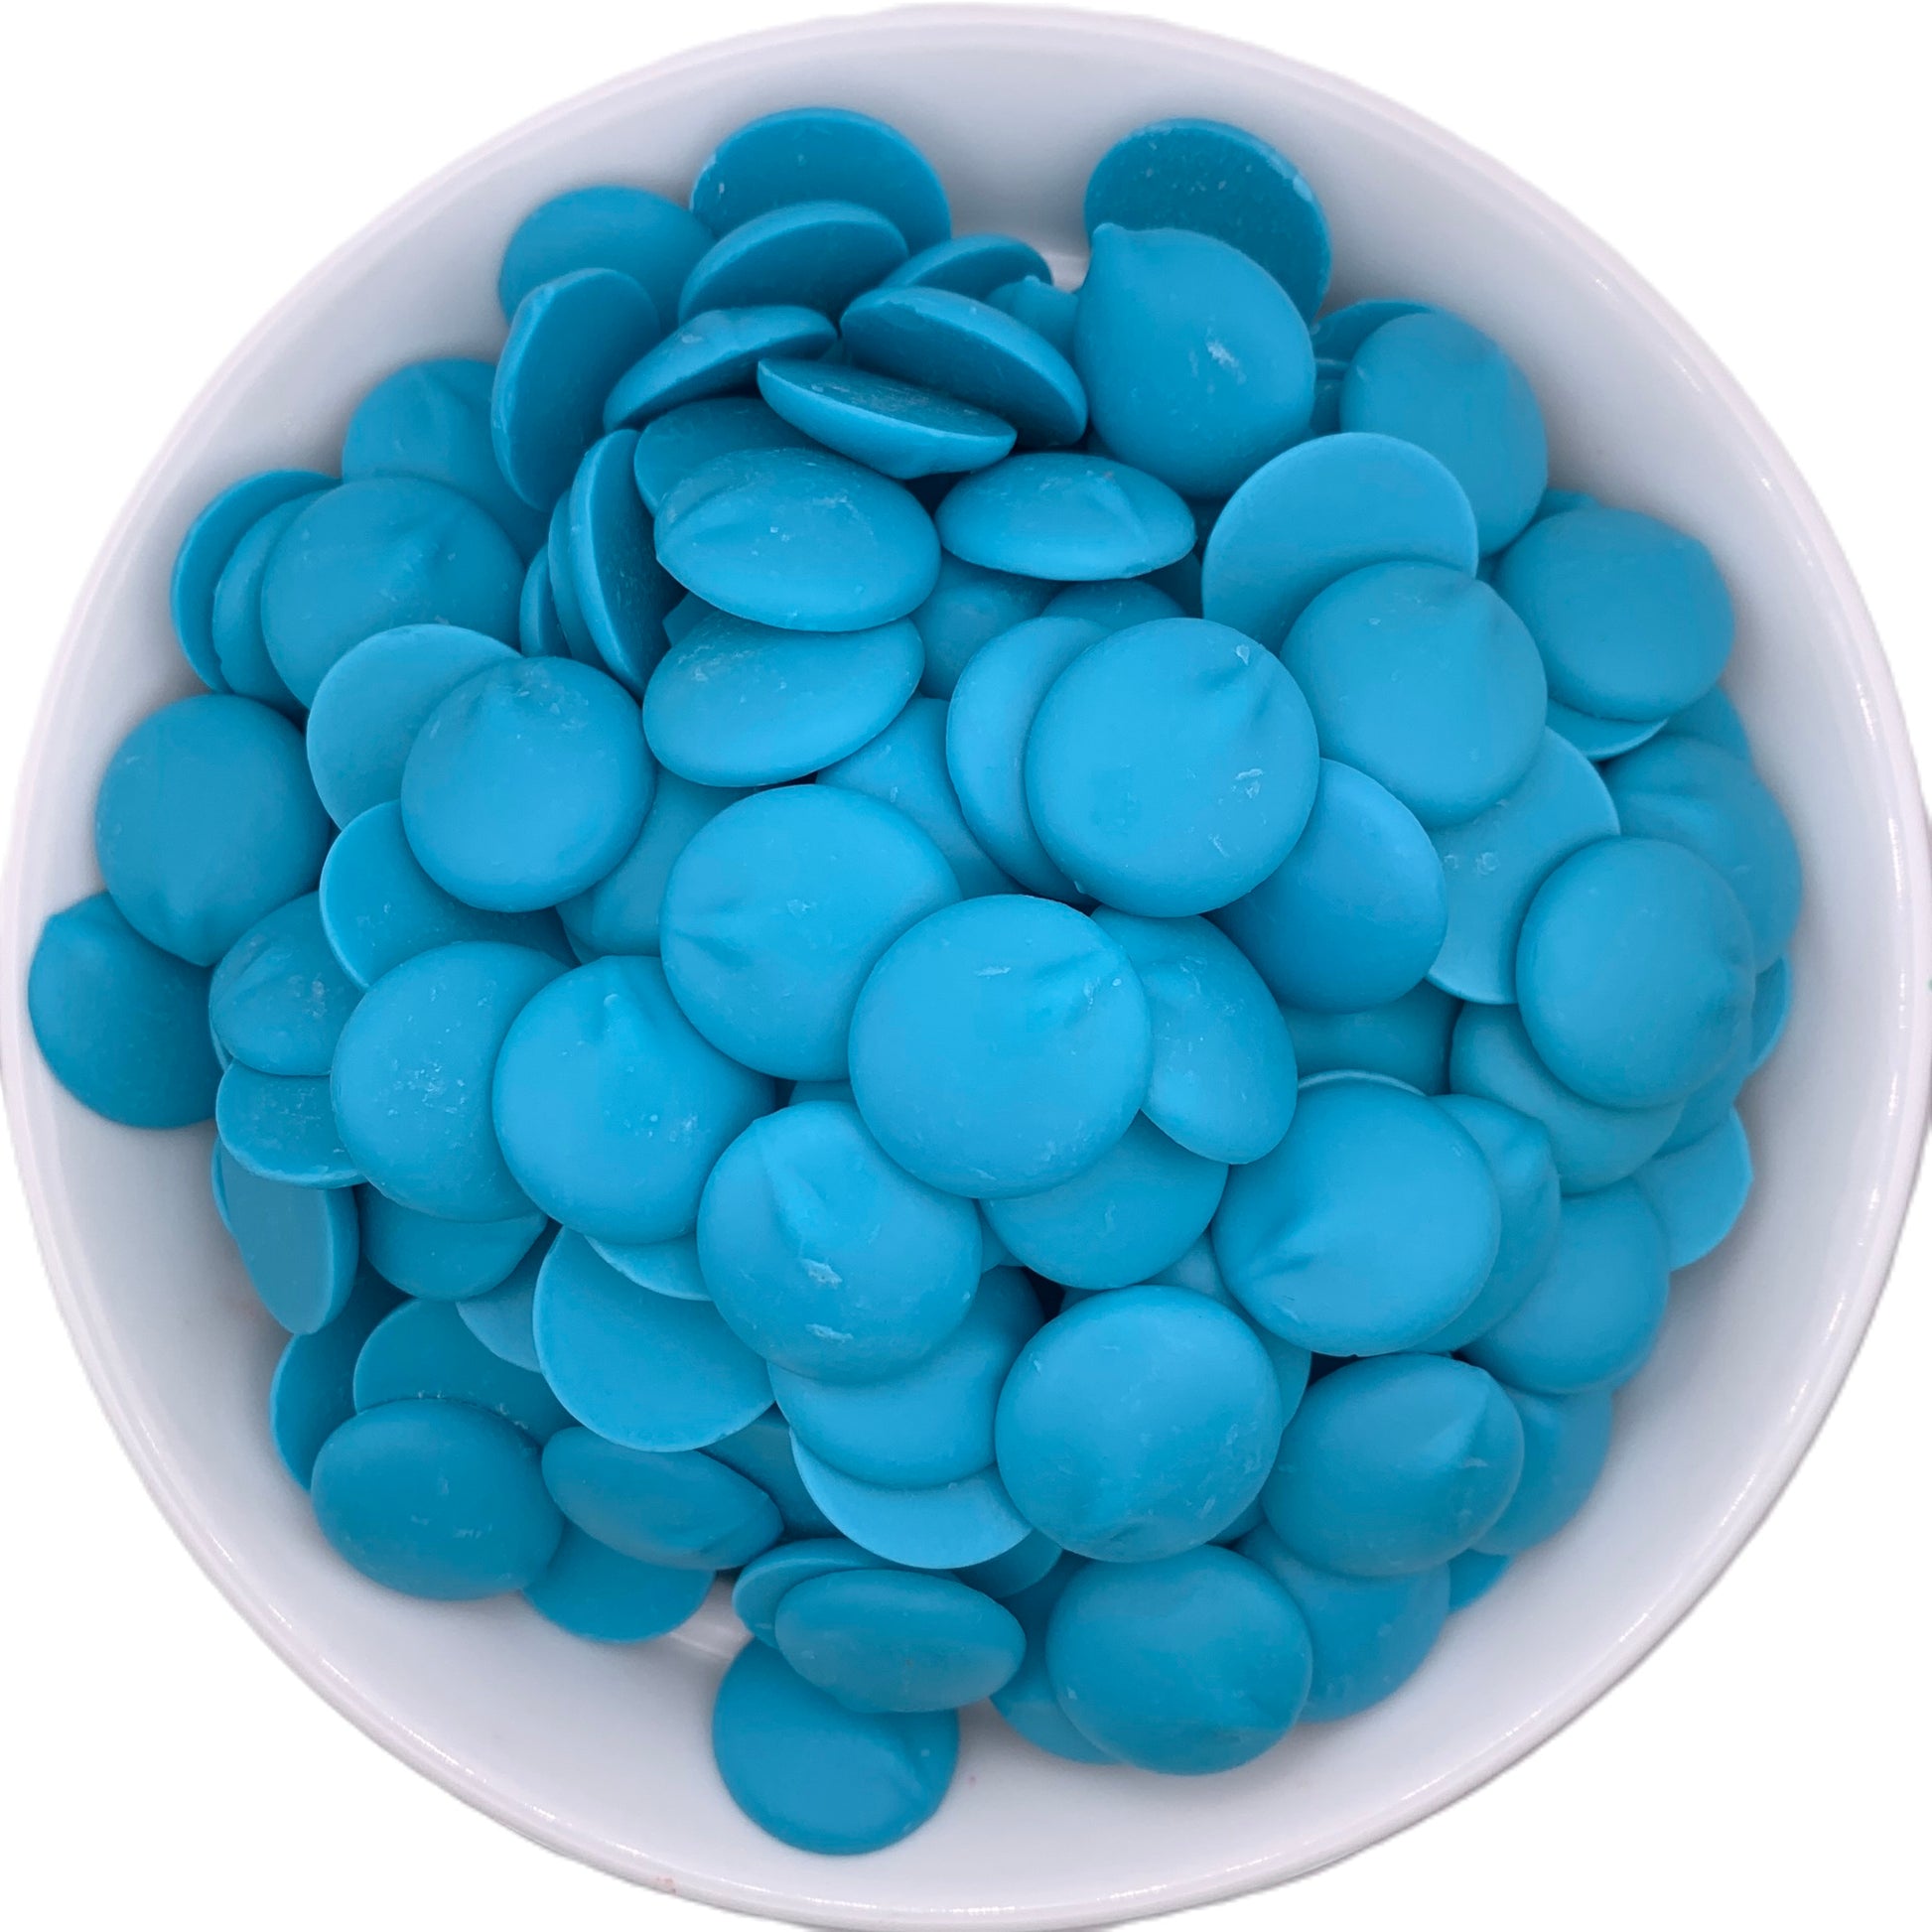 Merckens Light Blue Candy Melts, 2lbs – Frans Cake and Candy